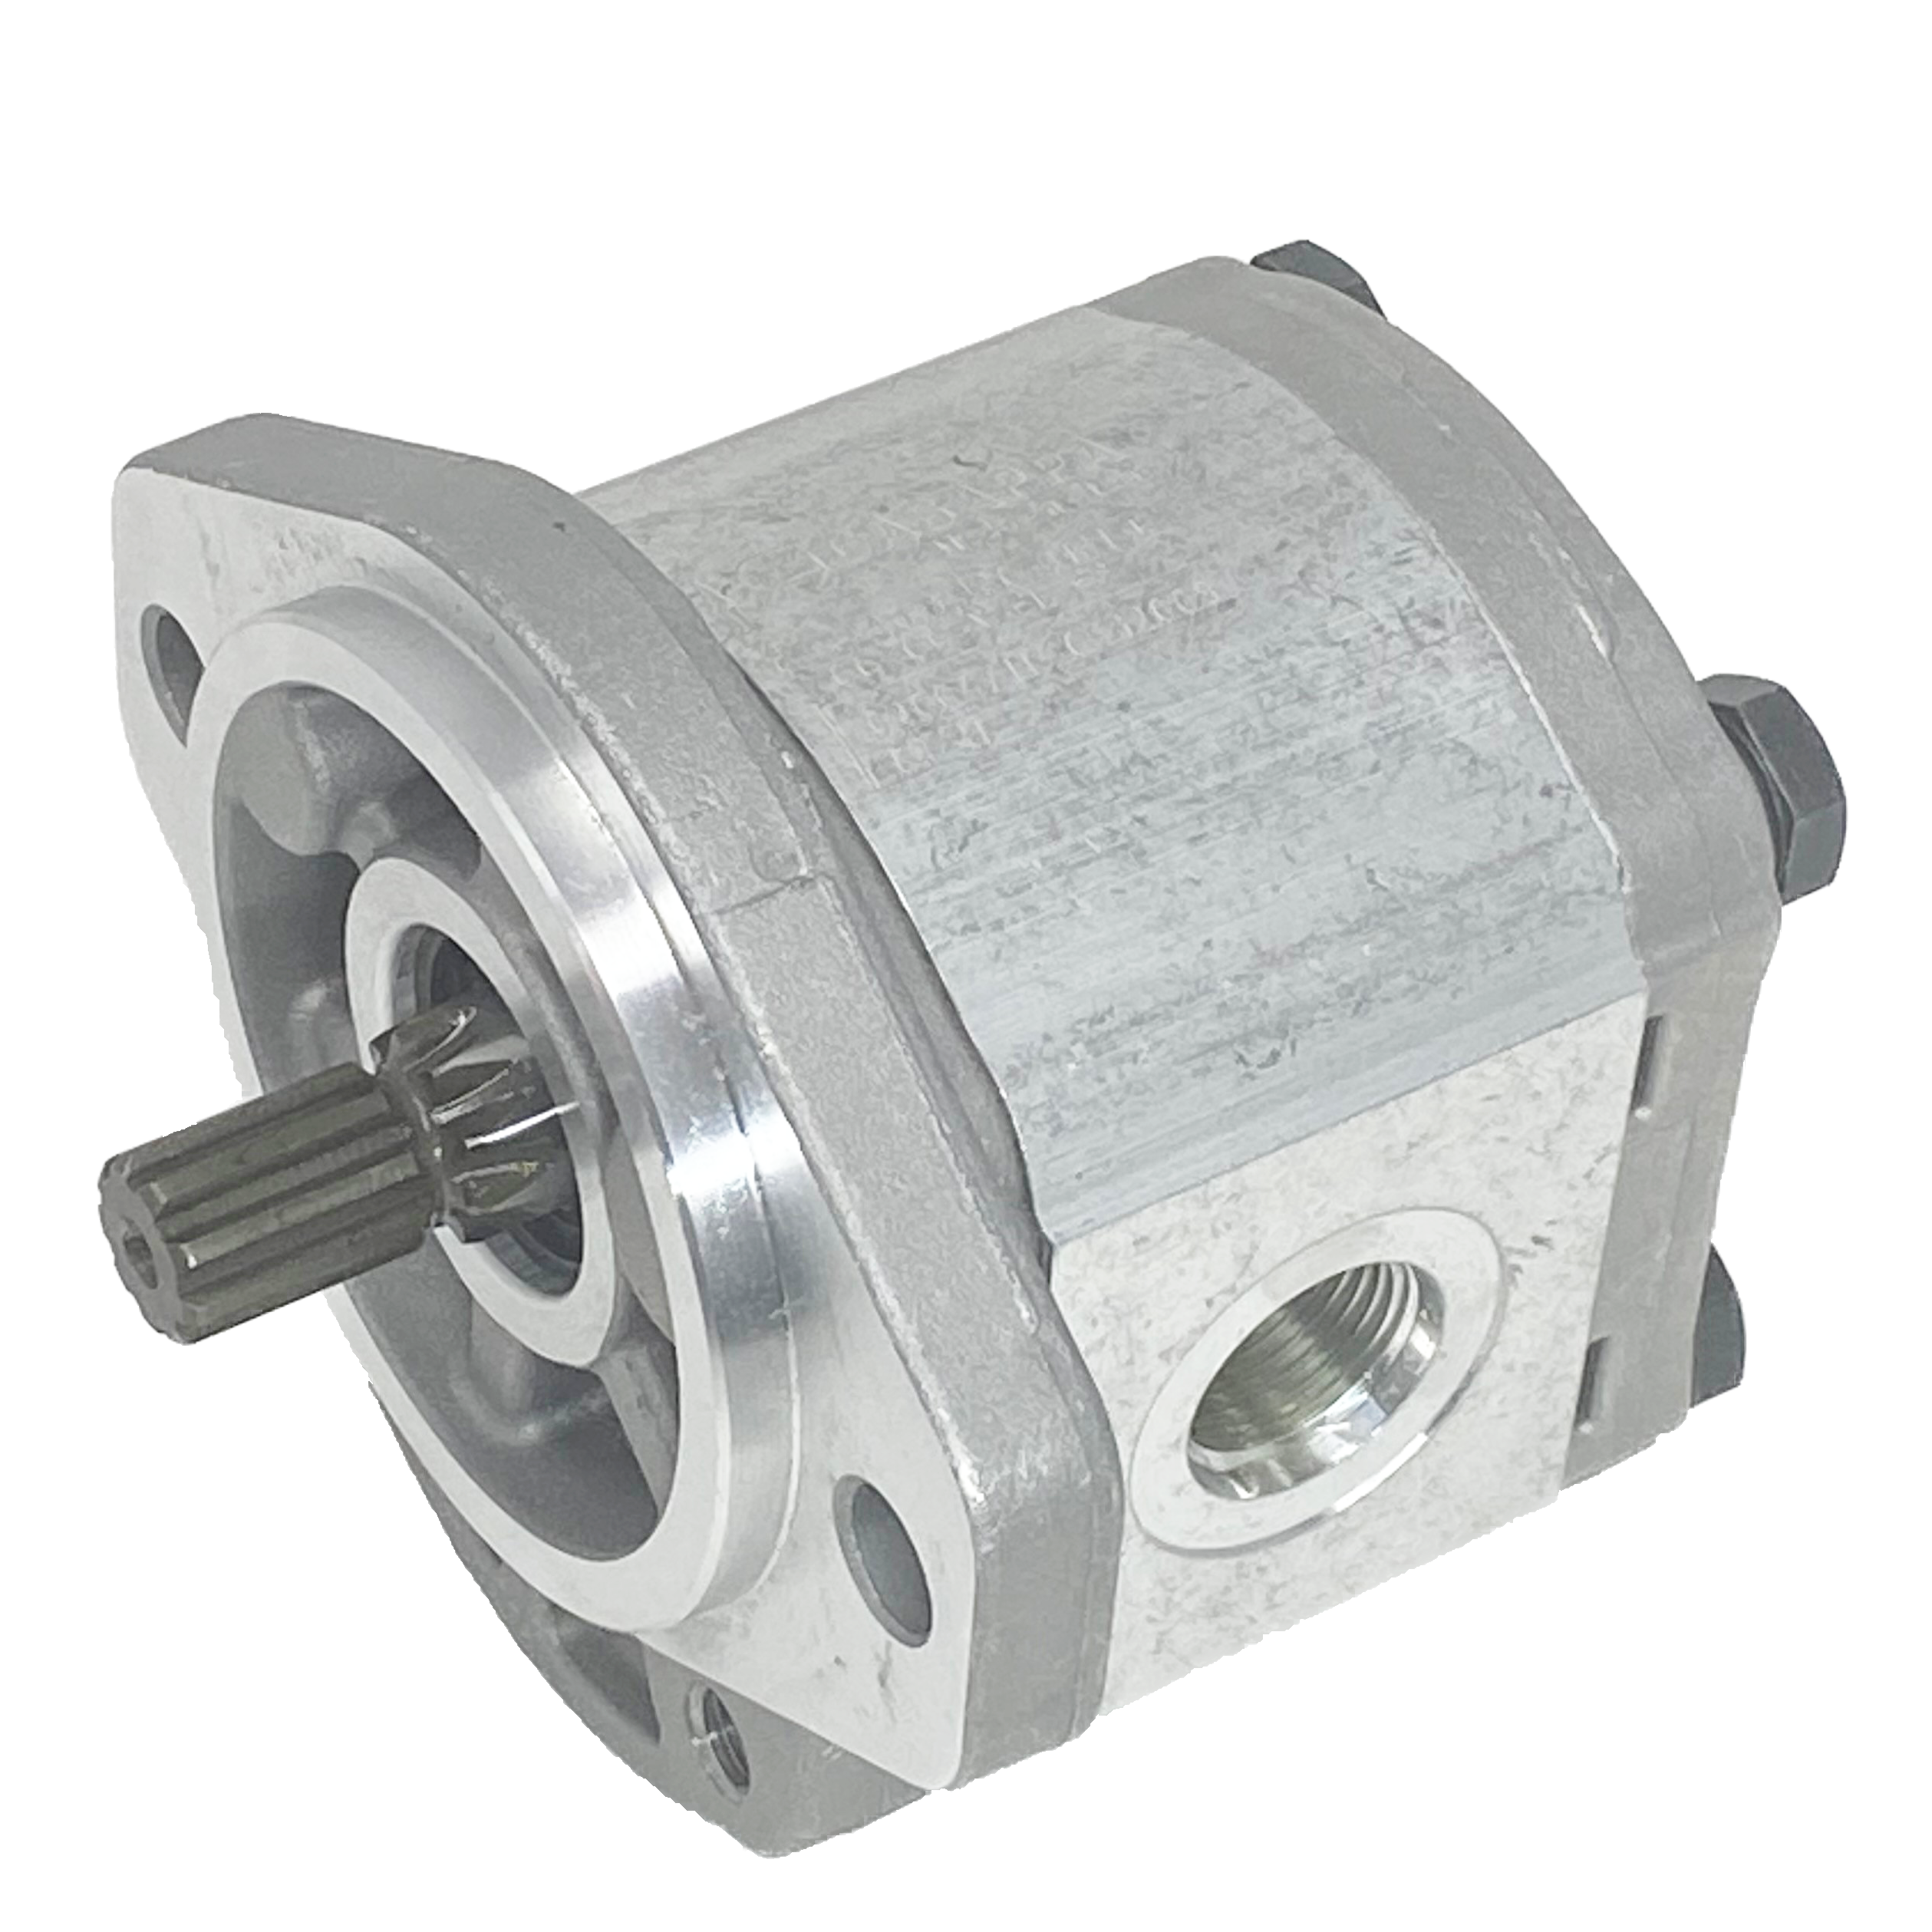 PLP20.8S0-49S1-LOF/OC-S7-N-EL-FS : Casappa Polaris Gear Pump, 8.26cc, 3625psi Rated, 3500RPM, CCW, 5/8" Keyed Shaft, SAE A 2-Bolt Flange, 1" #16 SAE Inlet, 0.625 (5/8") #10 SAE Outlet, Aluminum Body & Flange